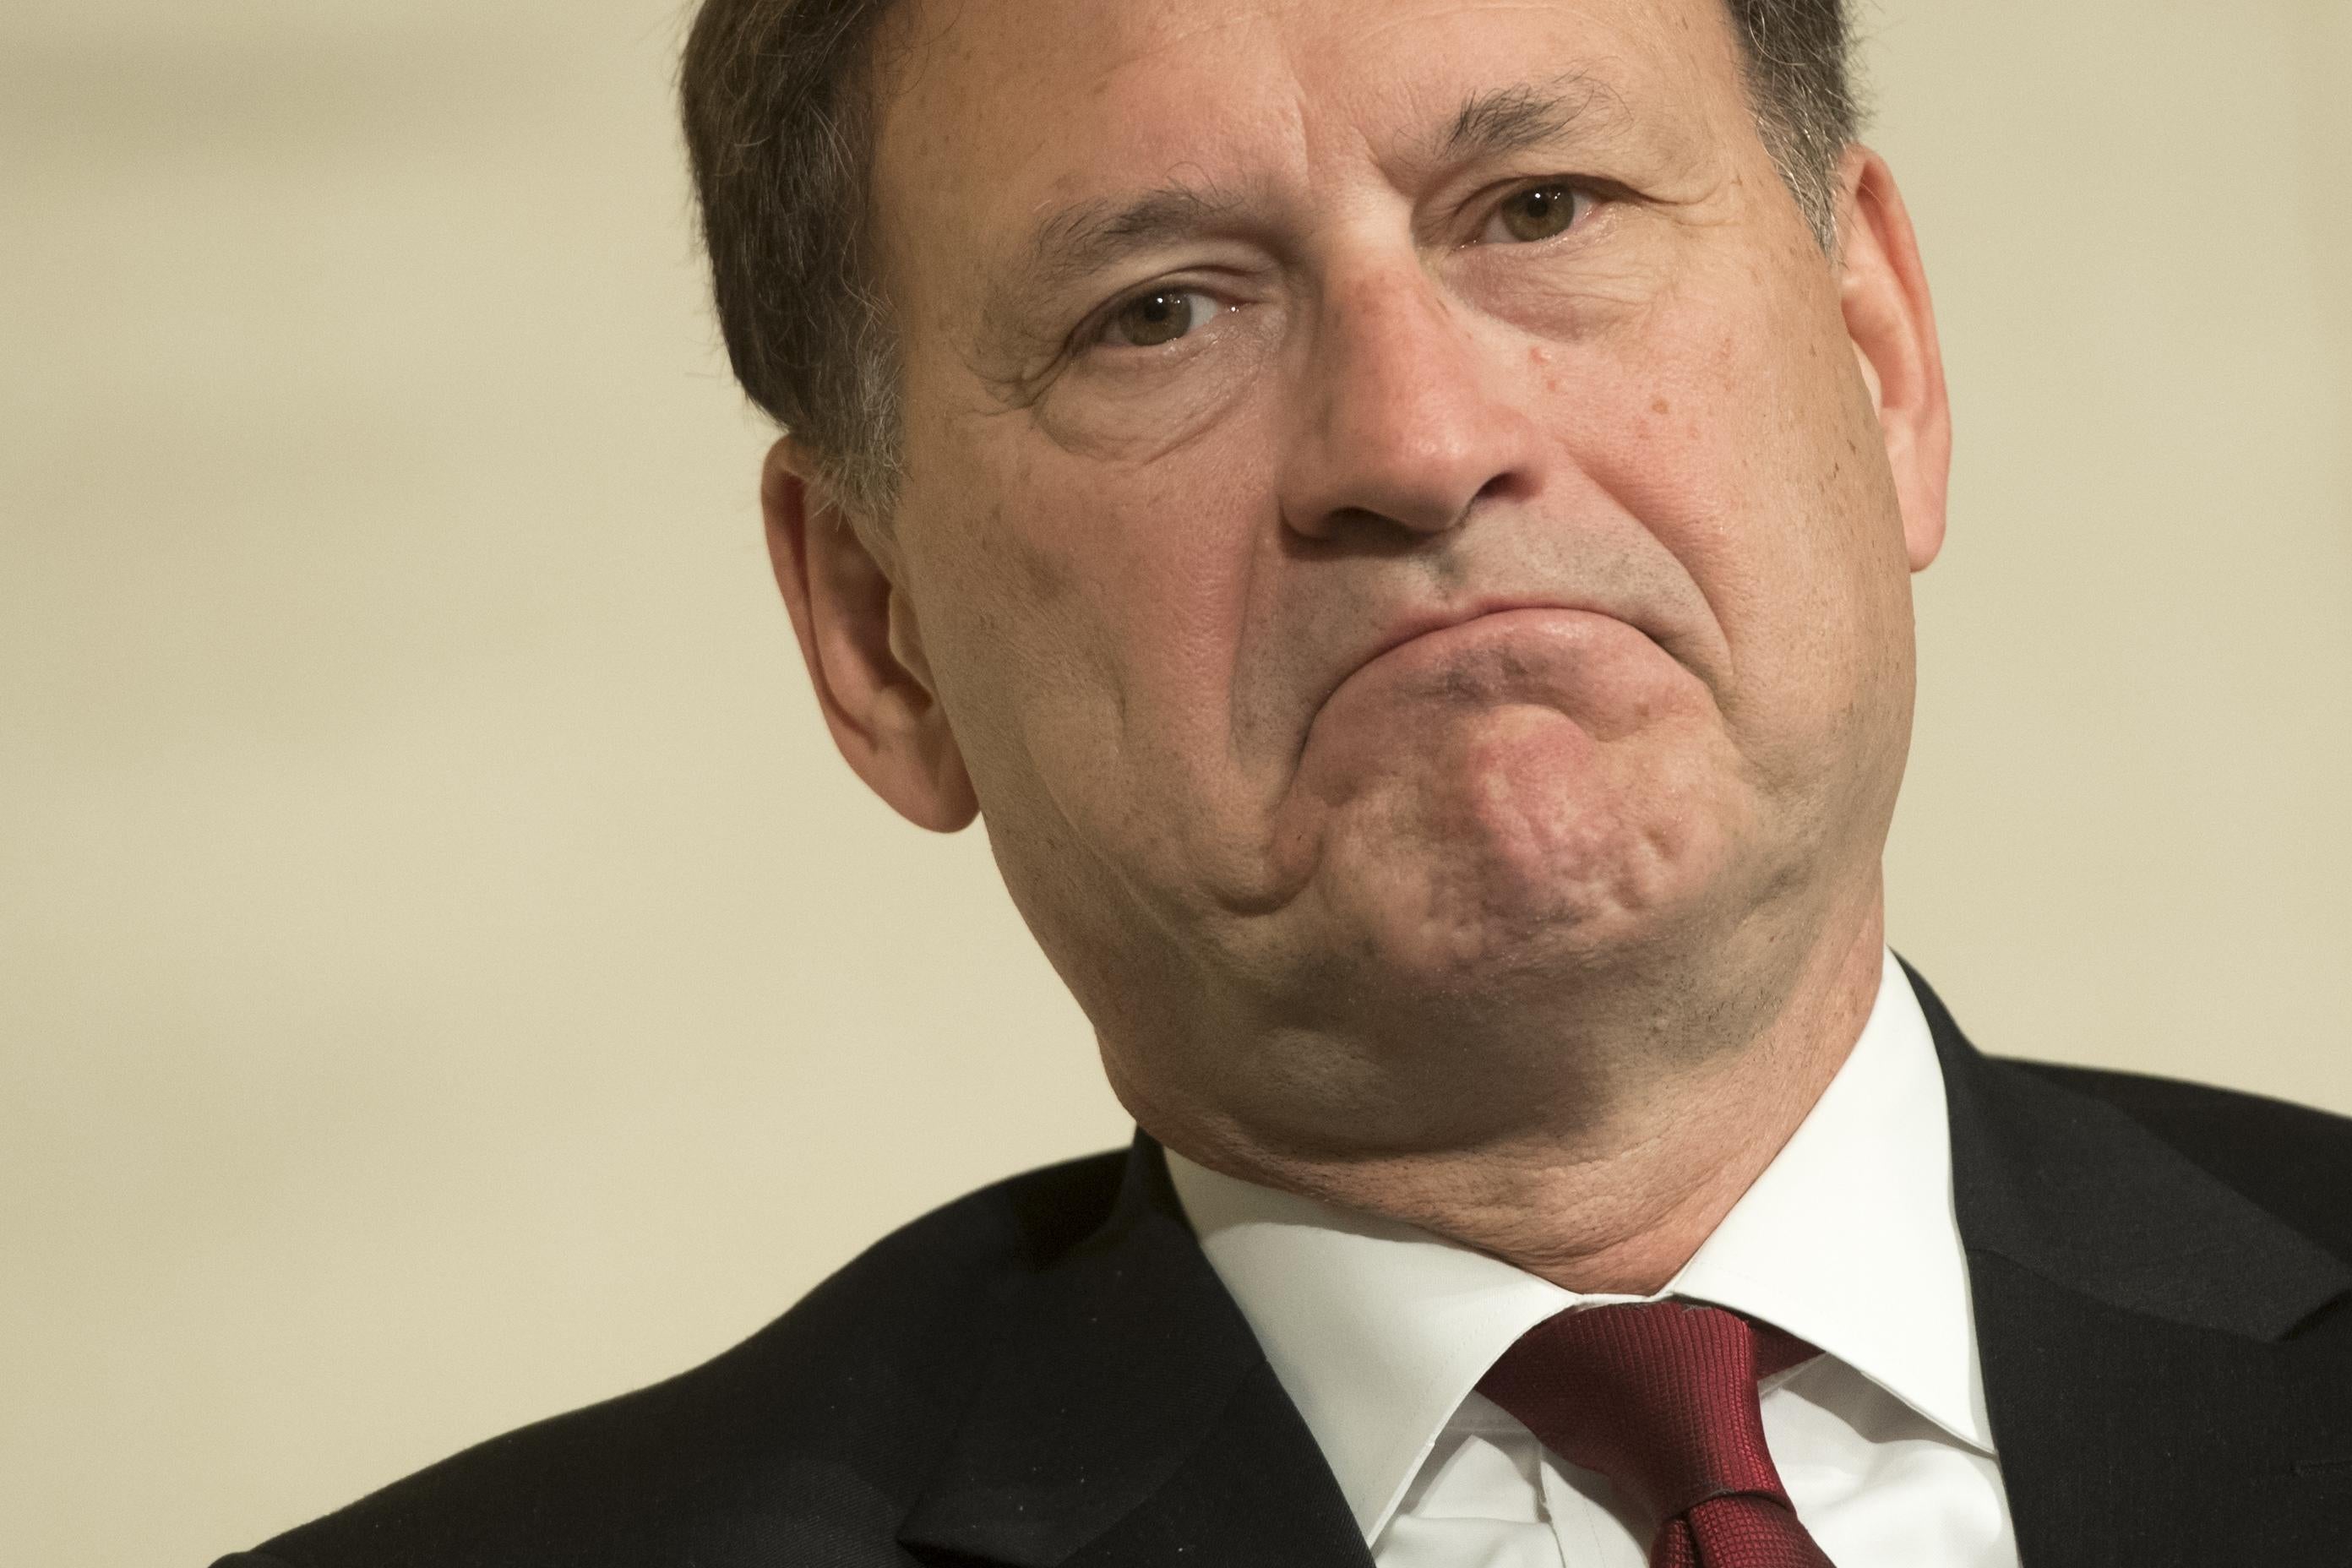 Alito makes a frowny face.